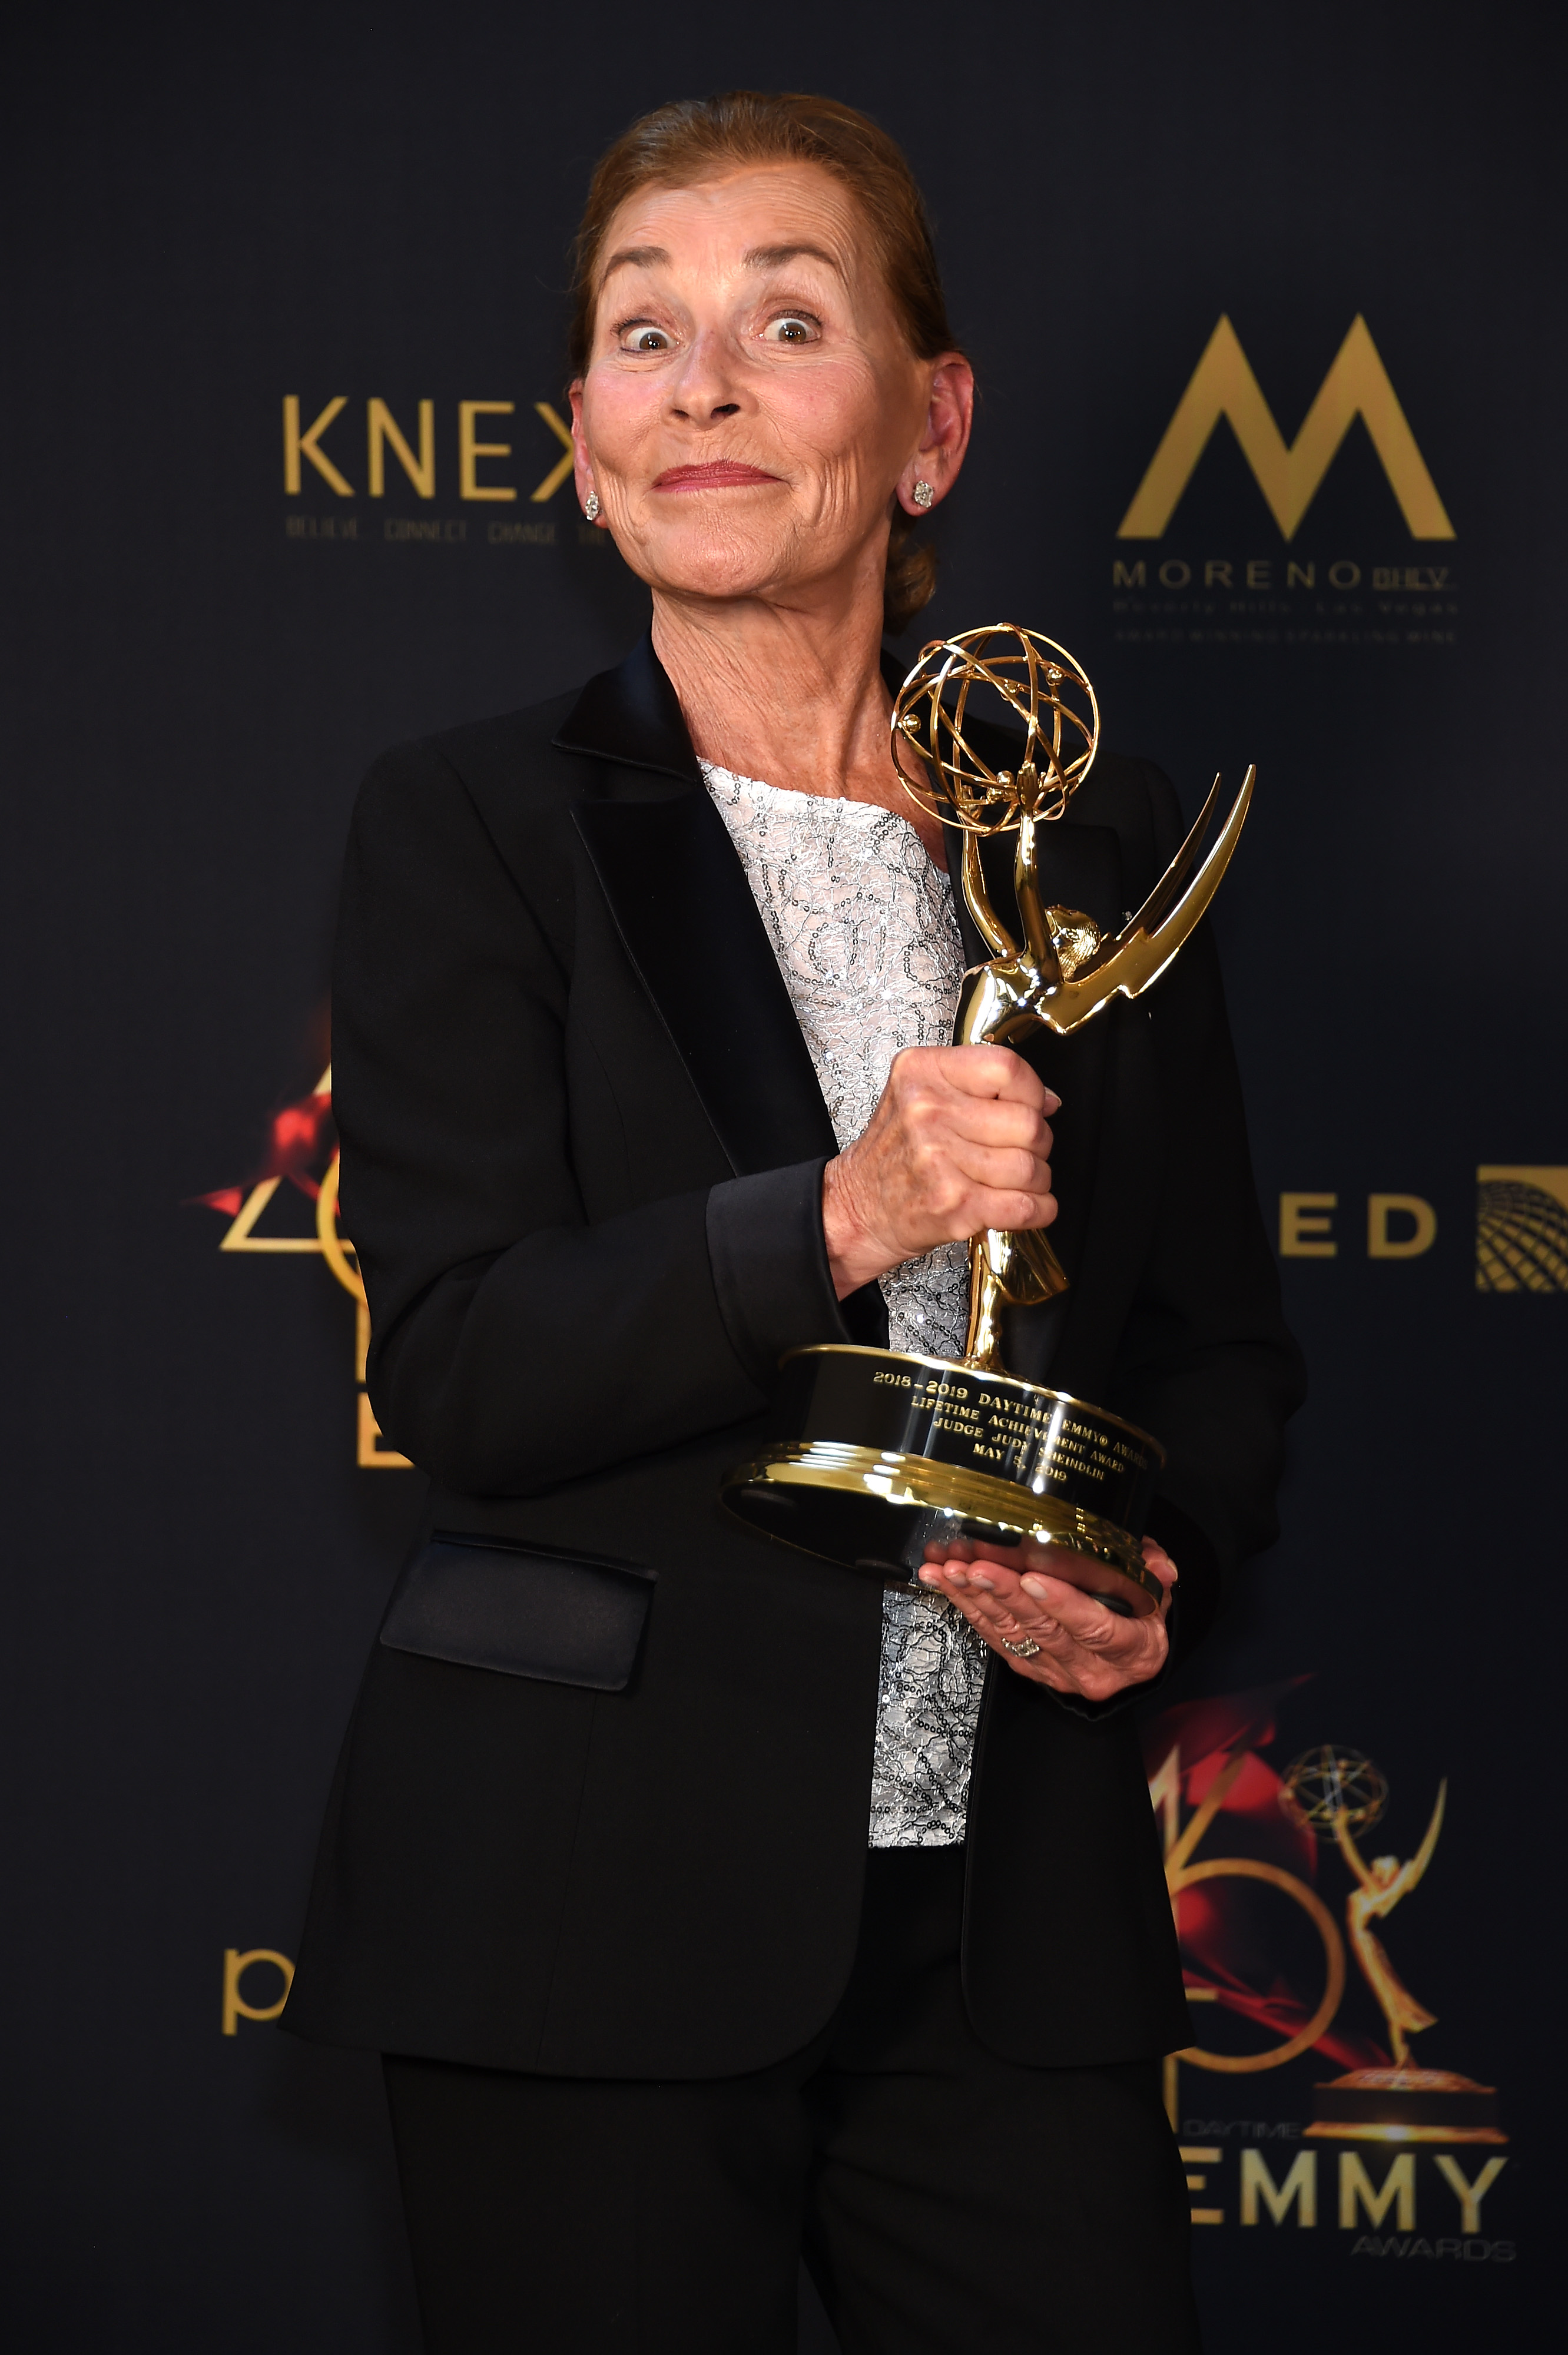 Judge Judy after winning her Lifetime Achievement Award at the Emmys in California in 2019 | Source: Getty Images